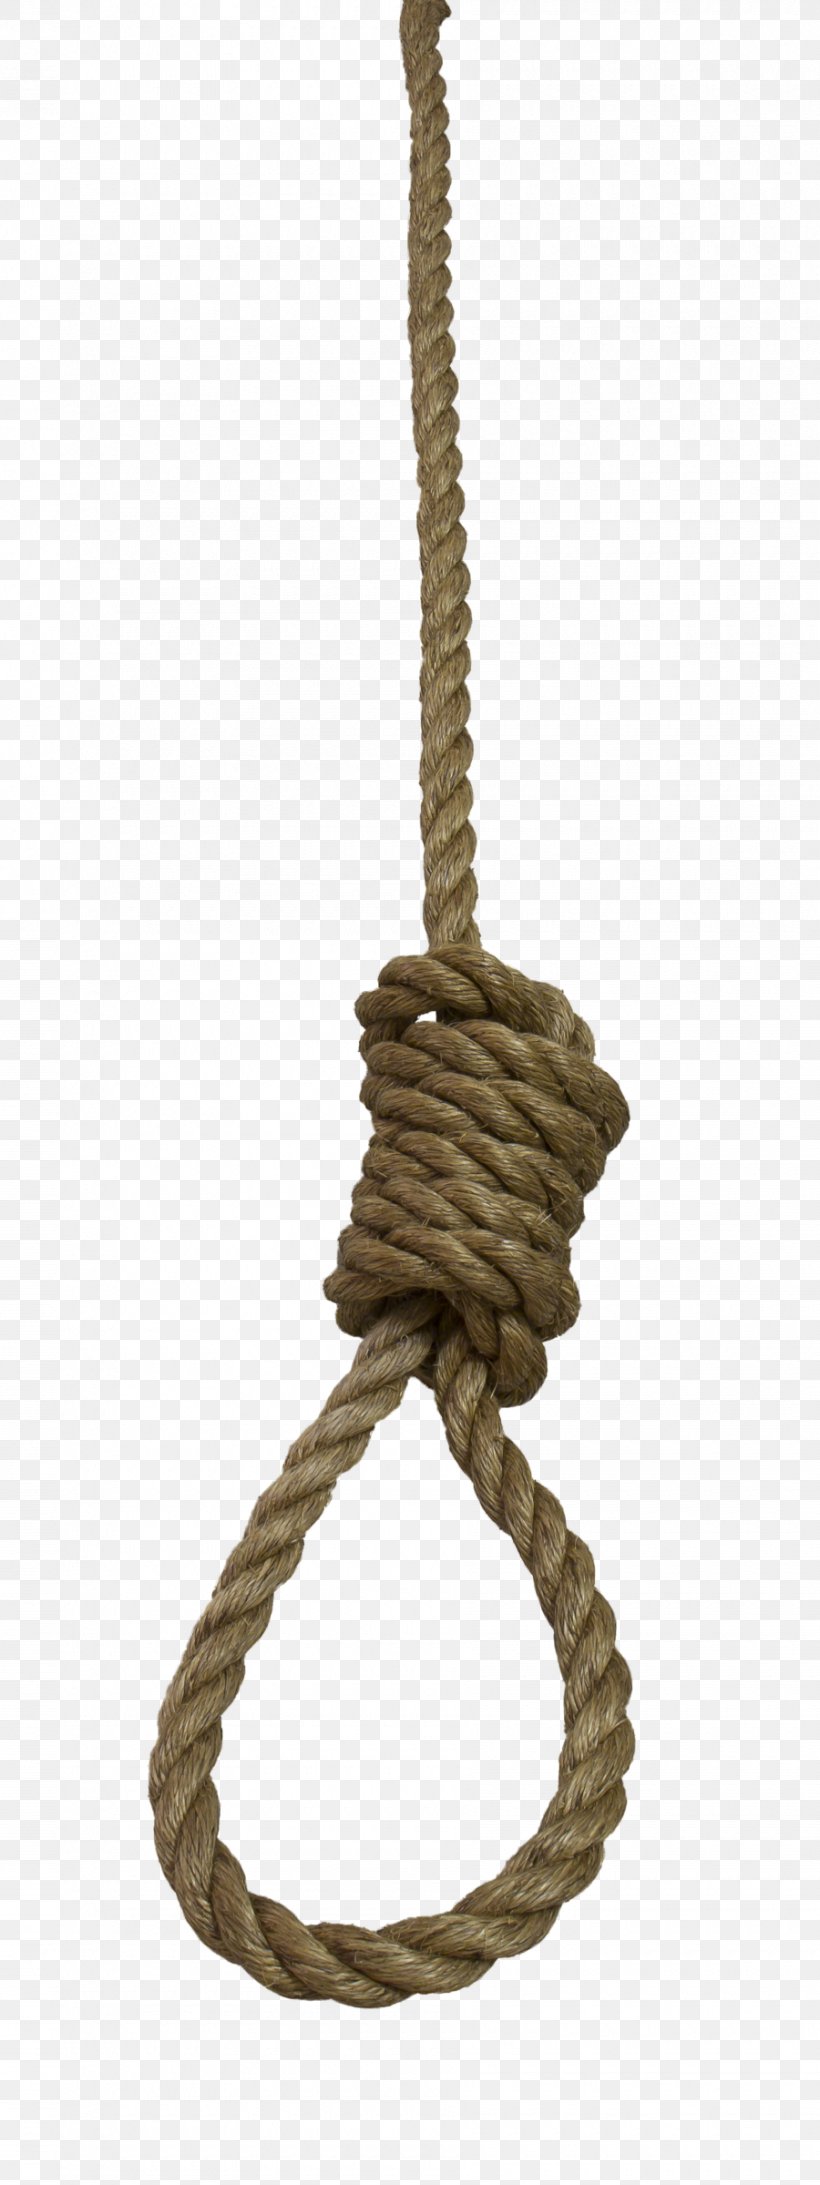 Noose Rope Hangman's Knot Clip Art, PNG, 900x2399px, Noose, Hanging, Hardware Accessory, Lasso, Rope Download Free